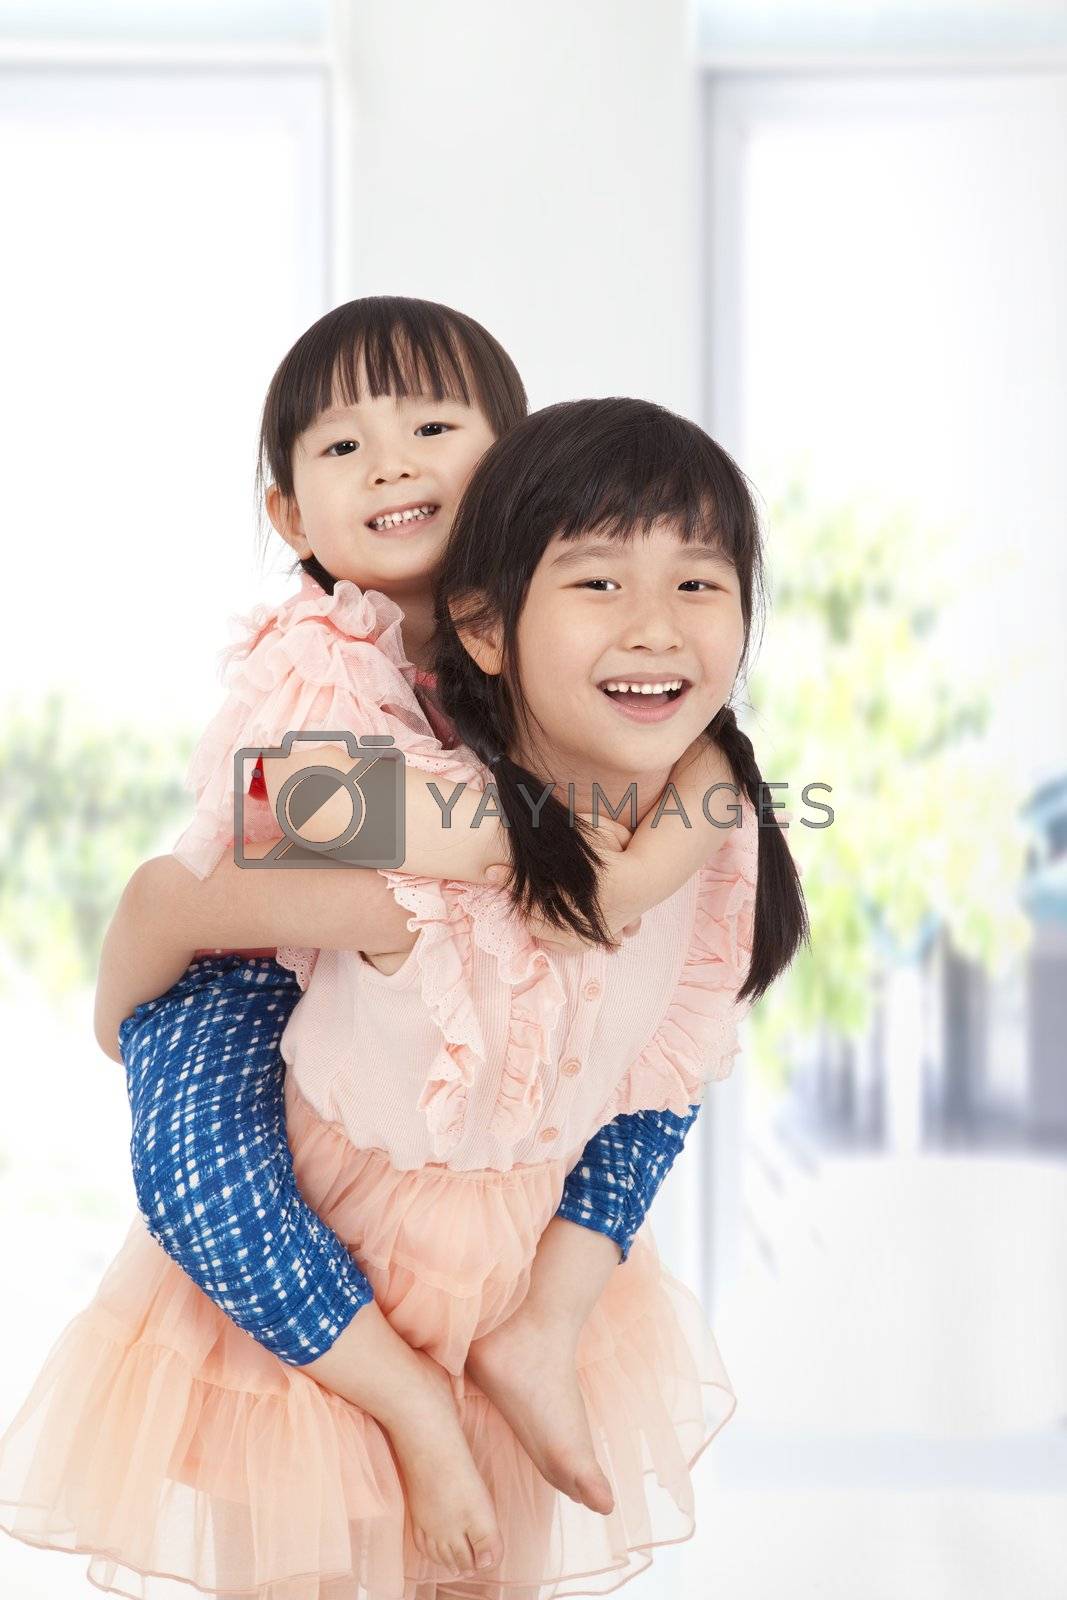 Royalty free image of happy asian girls by tomwang